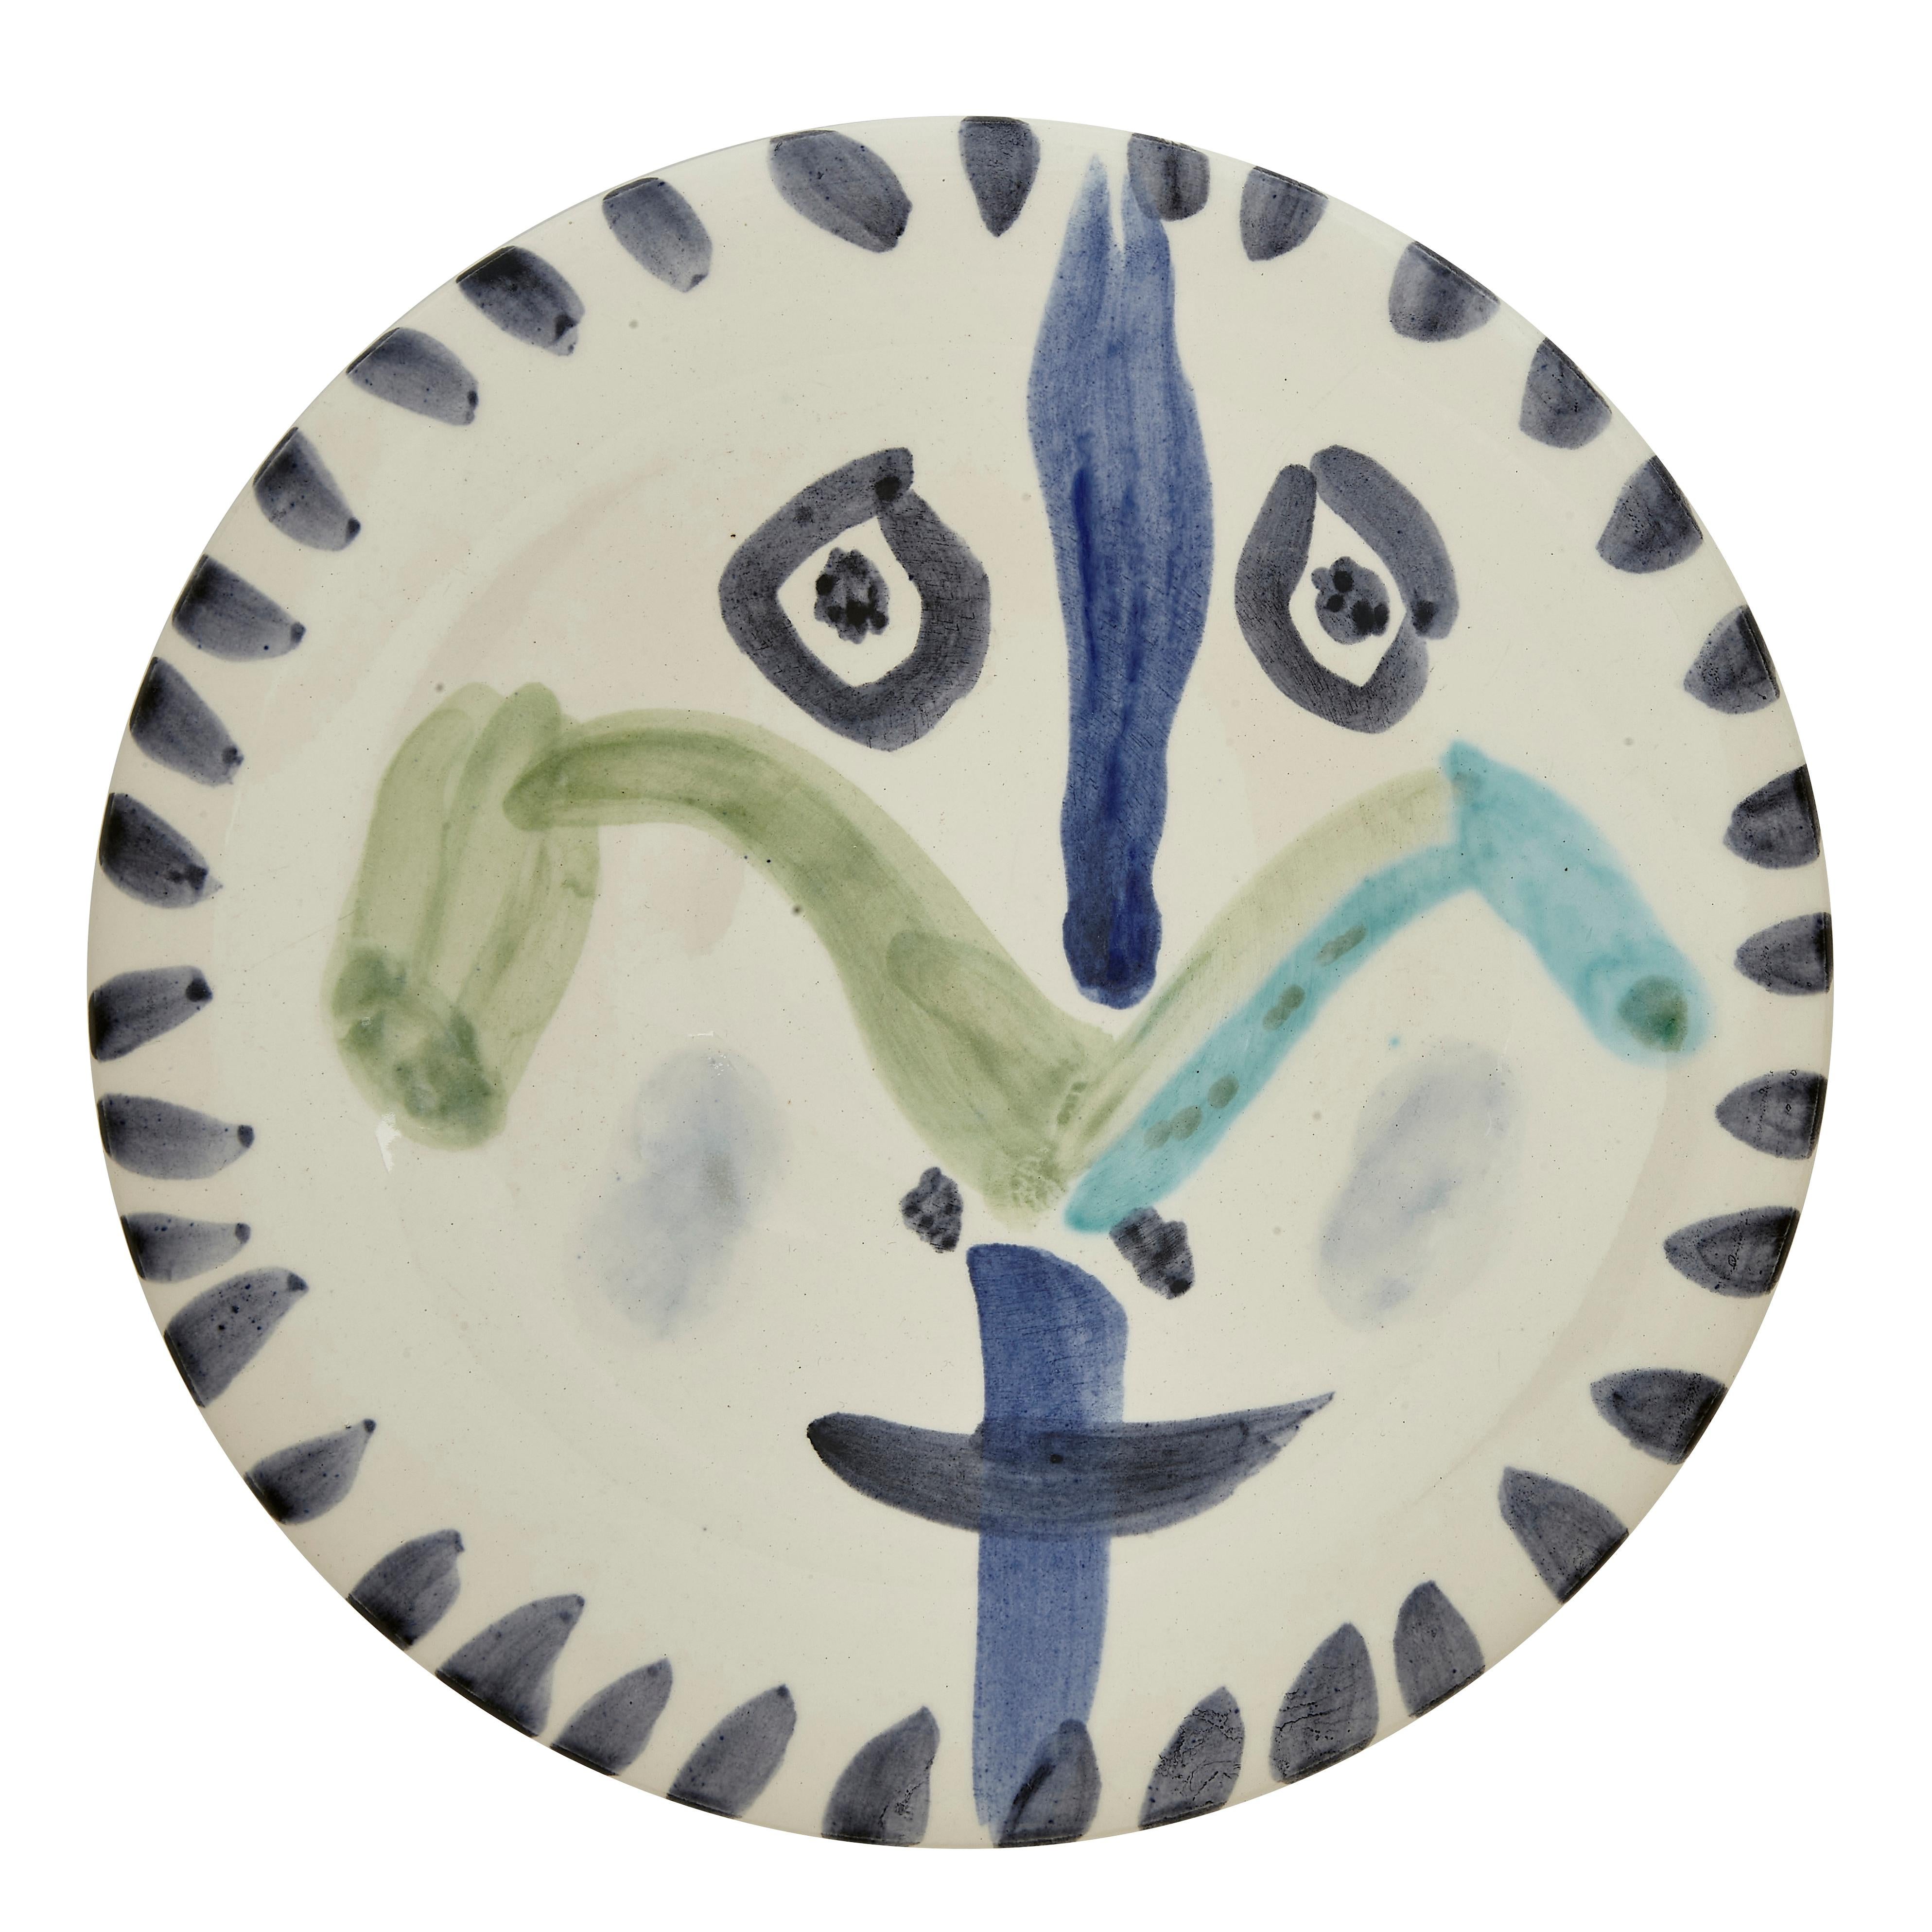 PABLO PICASSO (1881-1973) 
Visage No. 144 (A. R. 480) 

Terre de faïence plate, 1963, numbered 51/150 and inscribed 'Edition Picasso' and 'Madoura'.